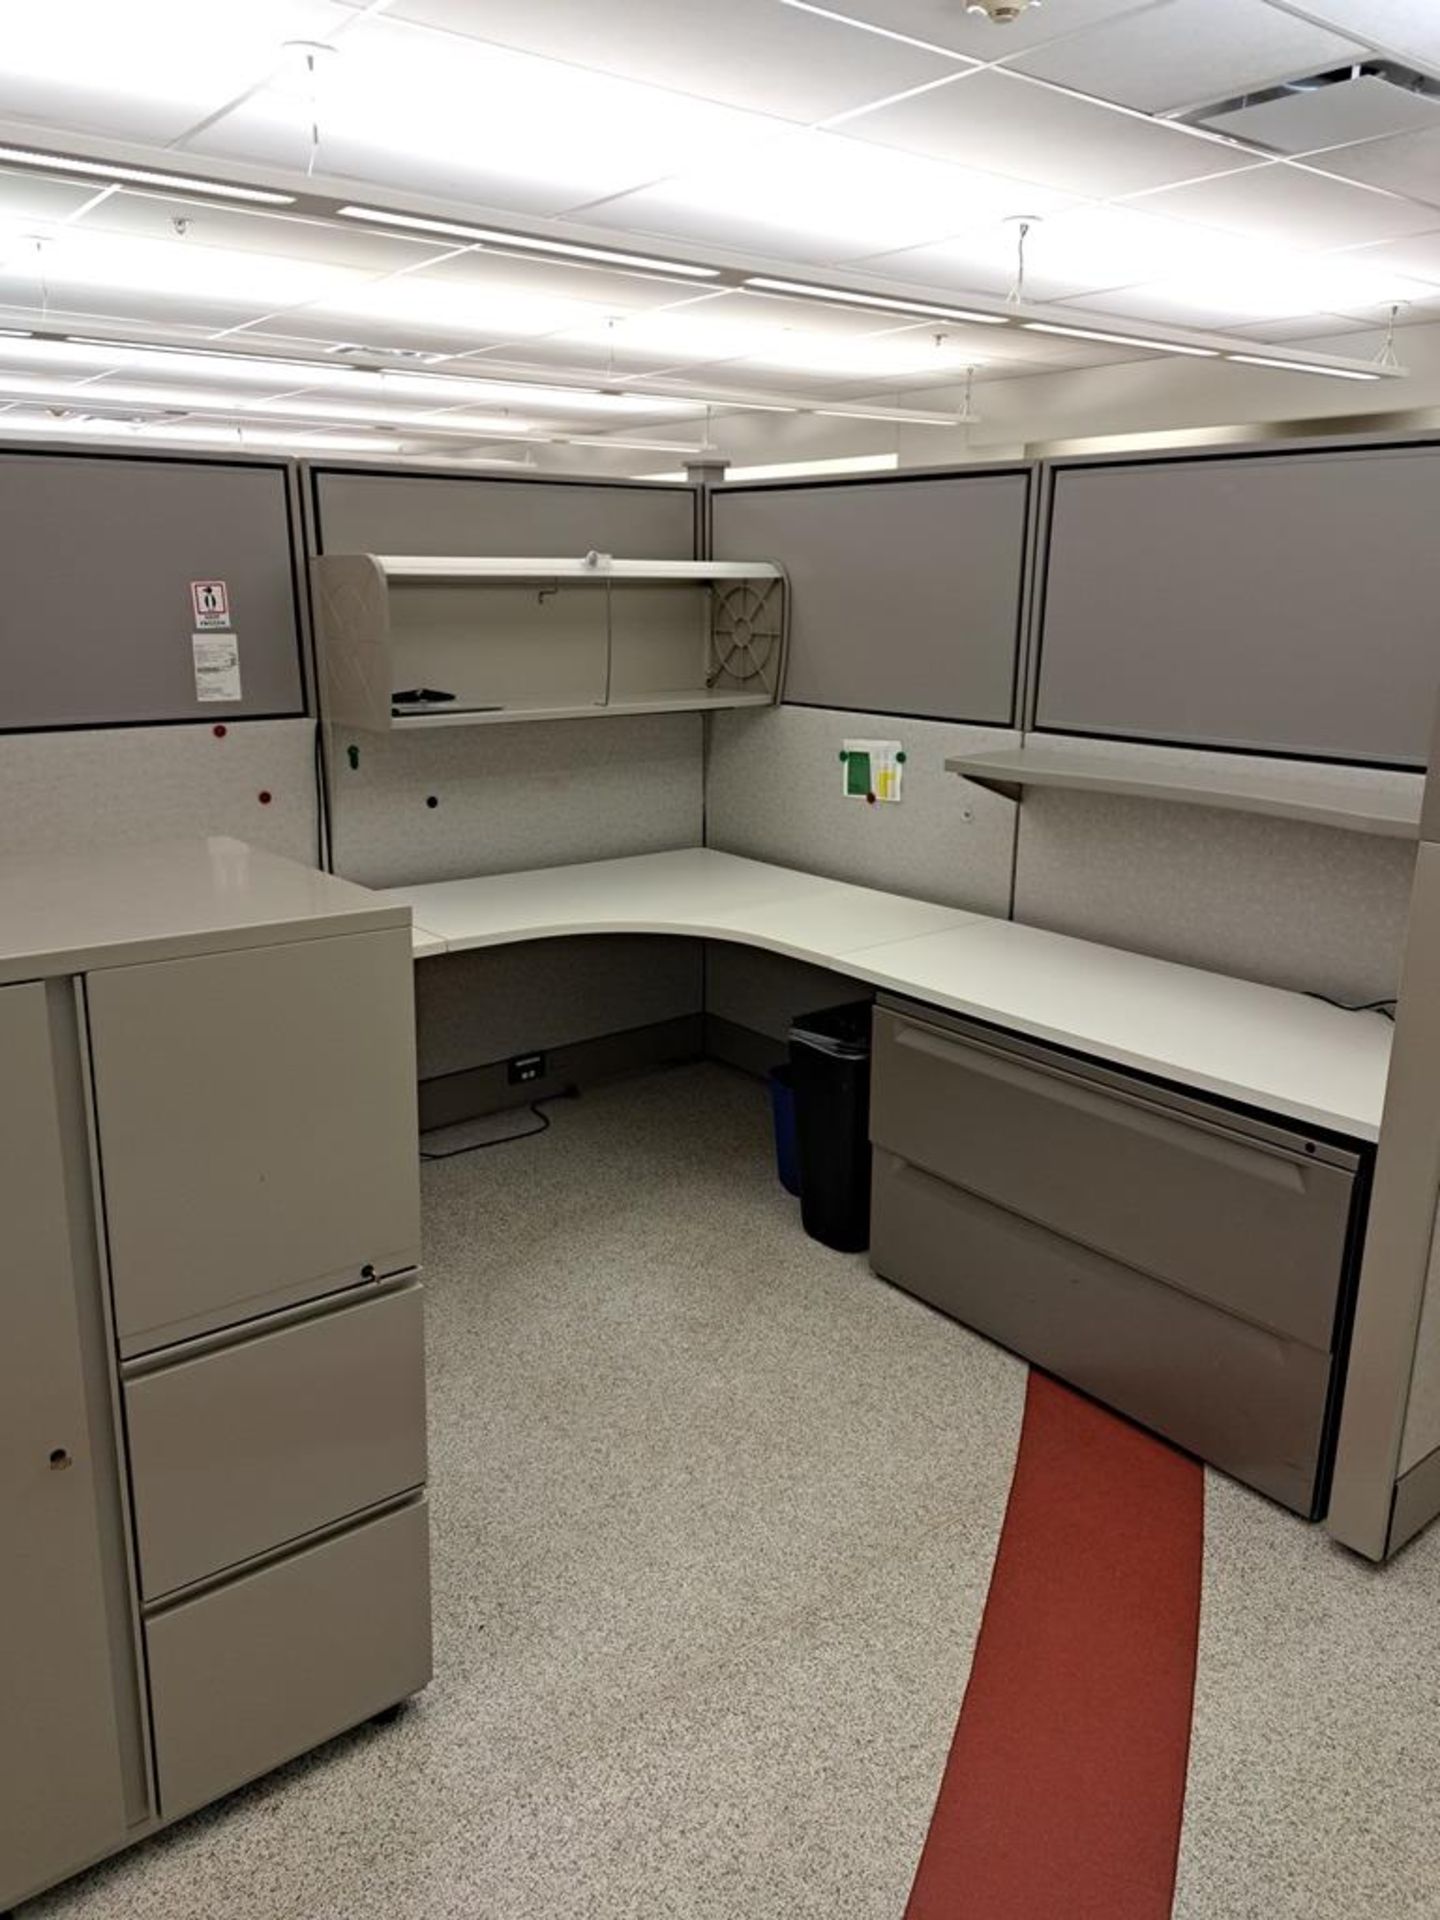 Herman Miller Cubicle Work Stations, 17' W X 50' L, (2) Work Stations per section, (12) Sections, - Image 6 of 25